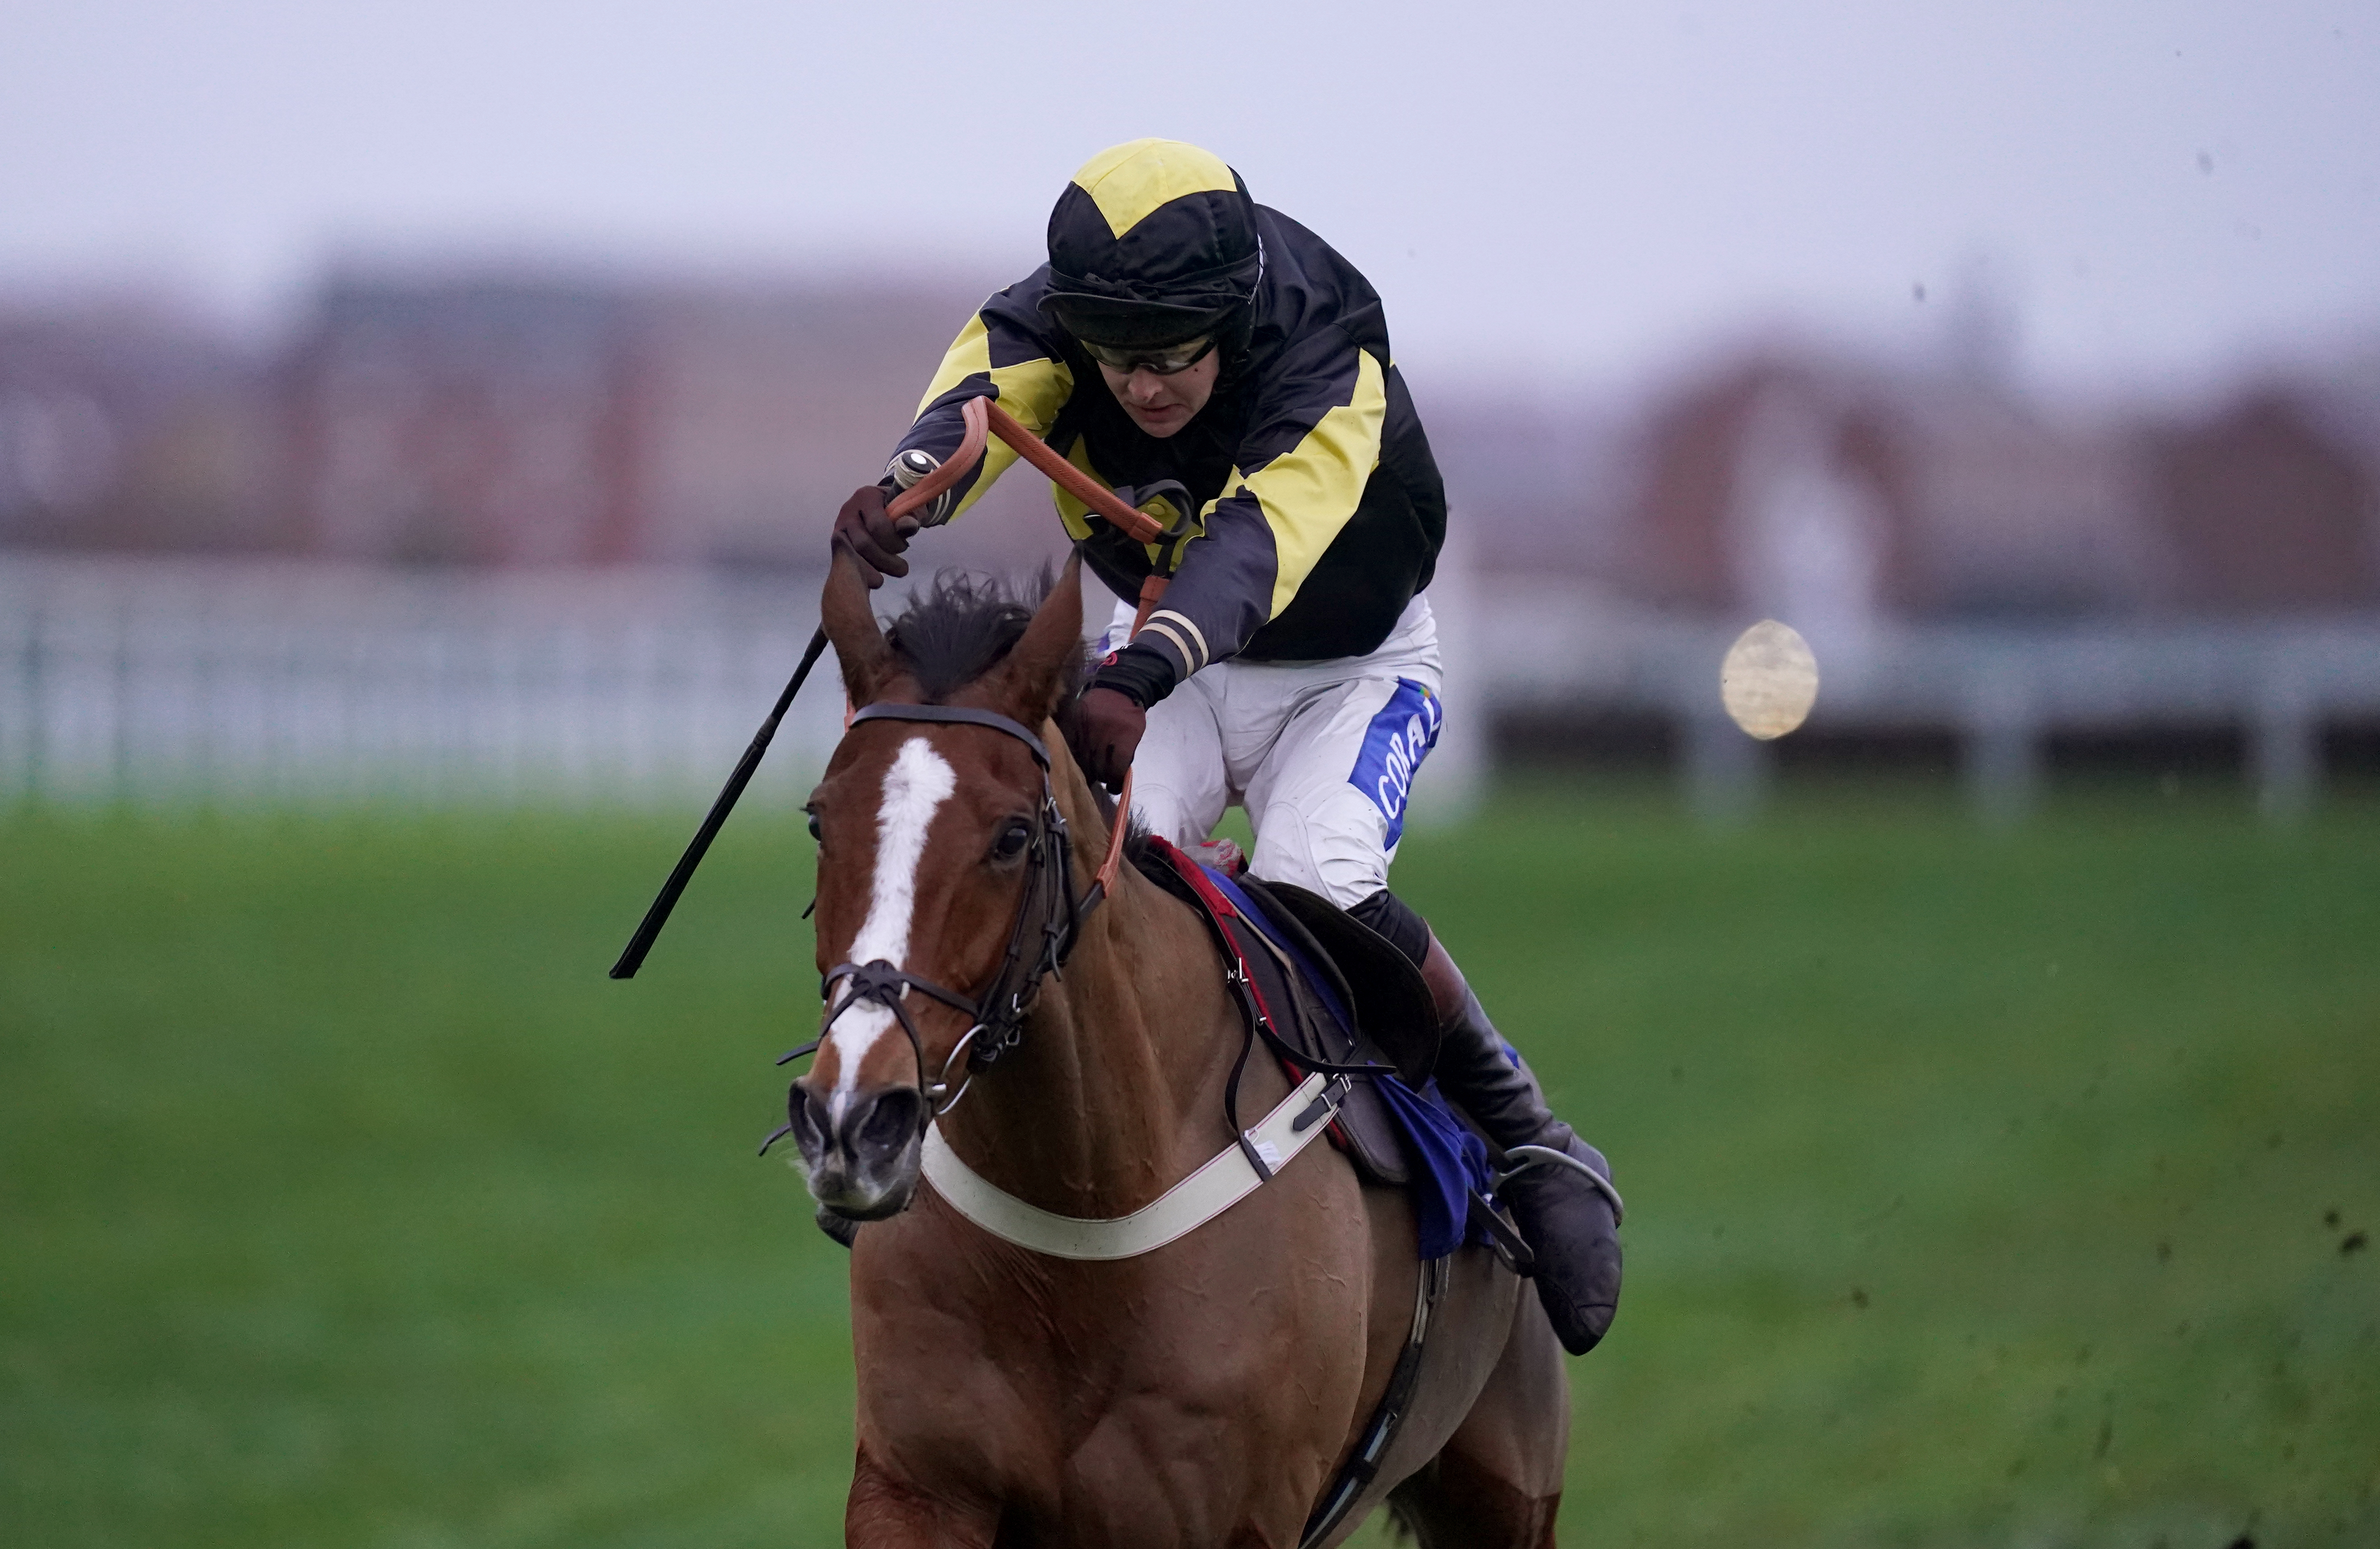 Amarillo Sky, here winning at Newbury, is a possible for the Clarence House Chase at Cheltenham